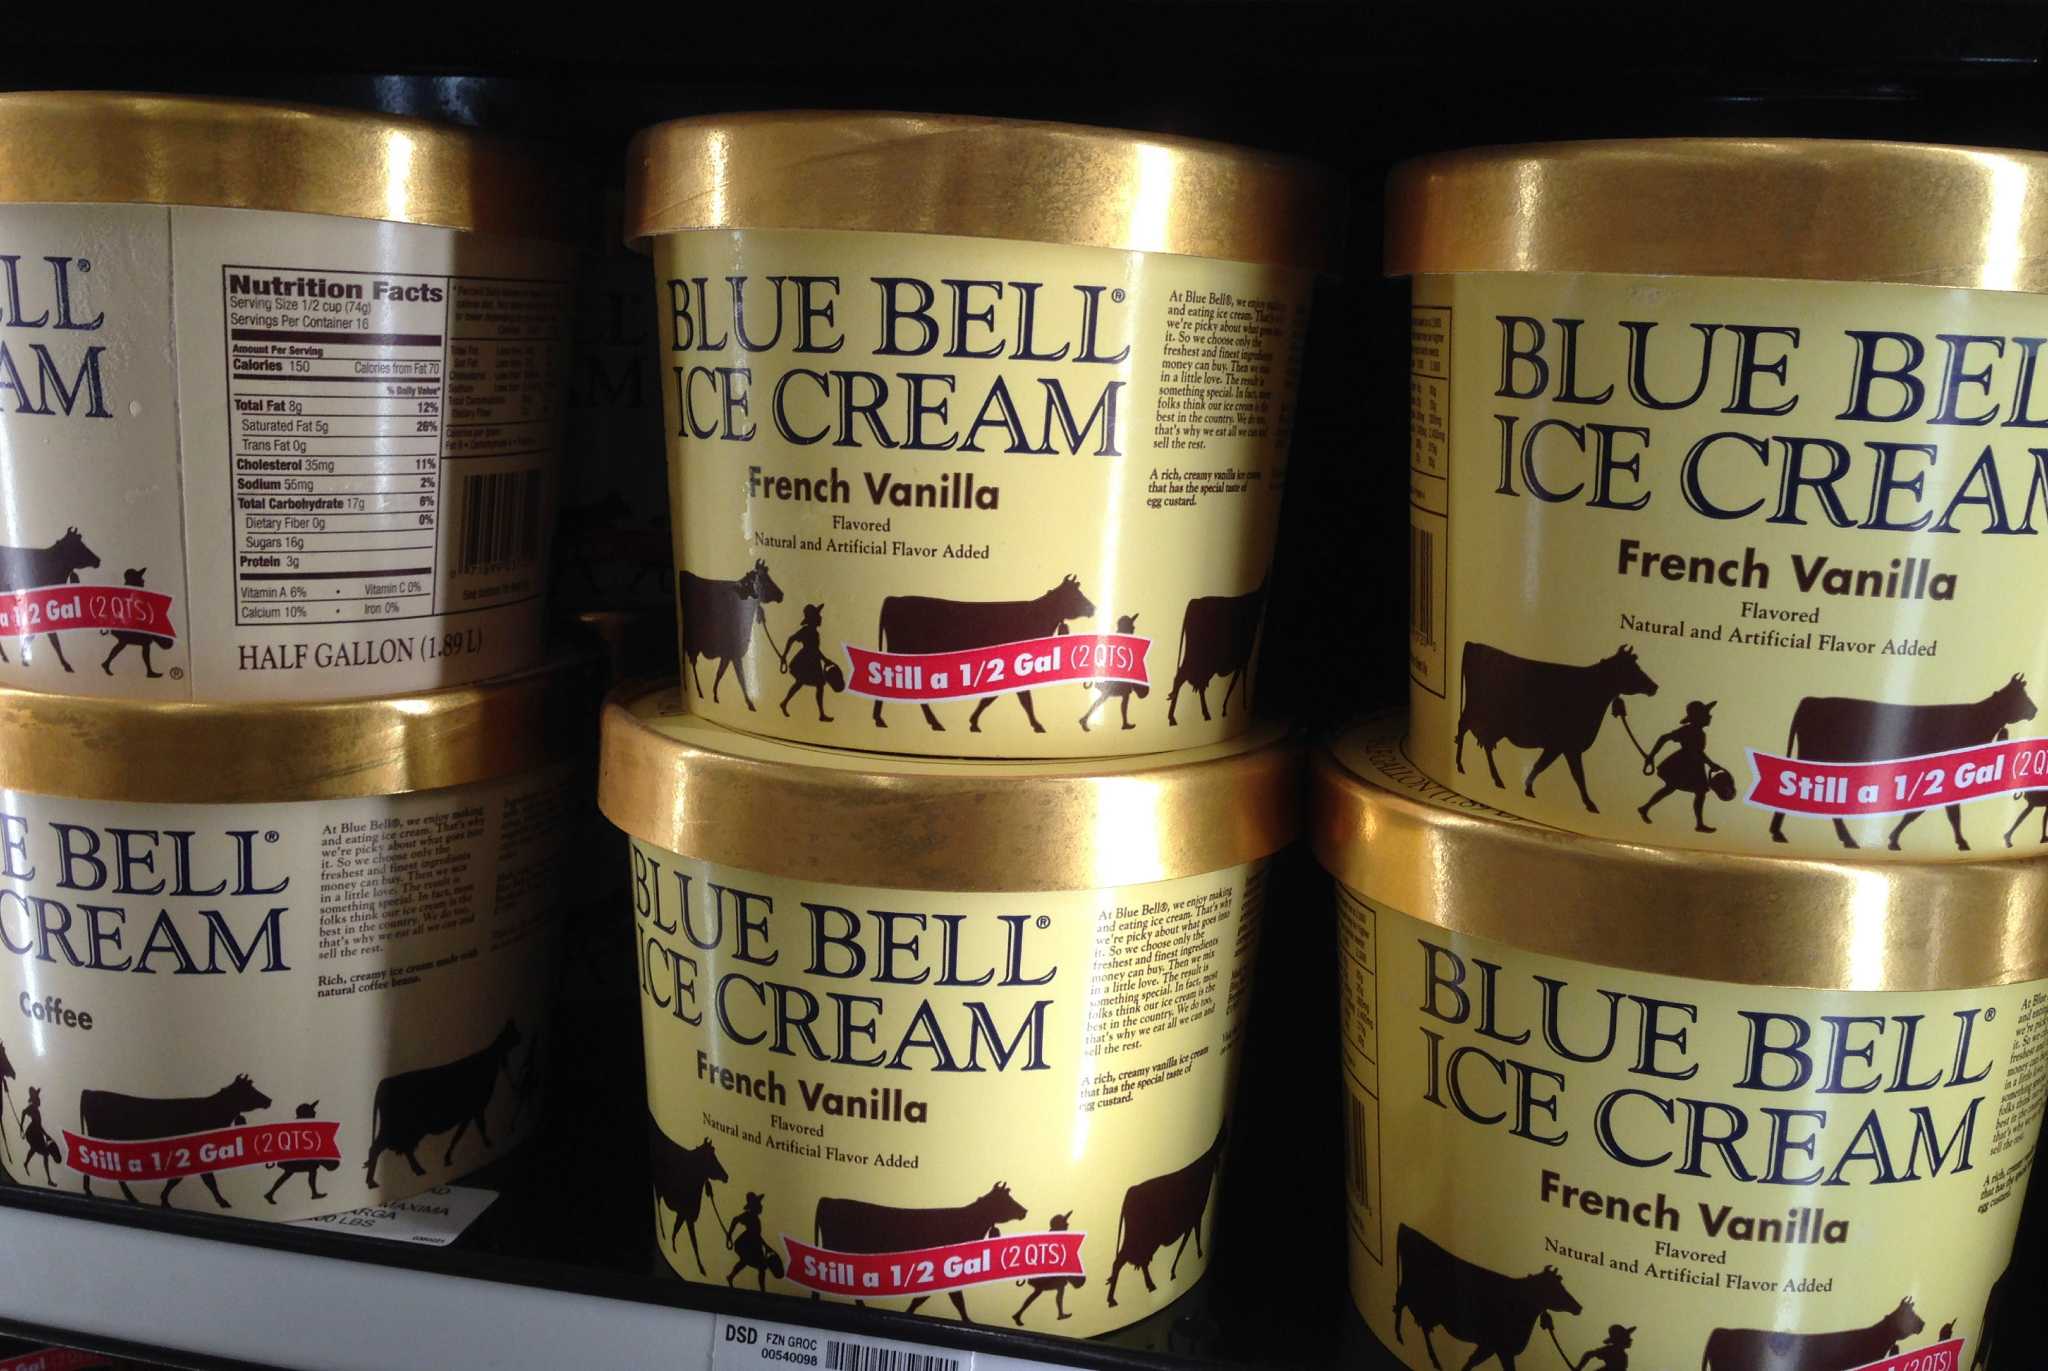 It's unclear how Blue Bell, FDA responded to condensation